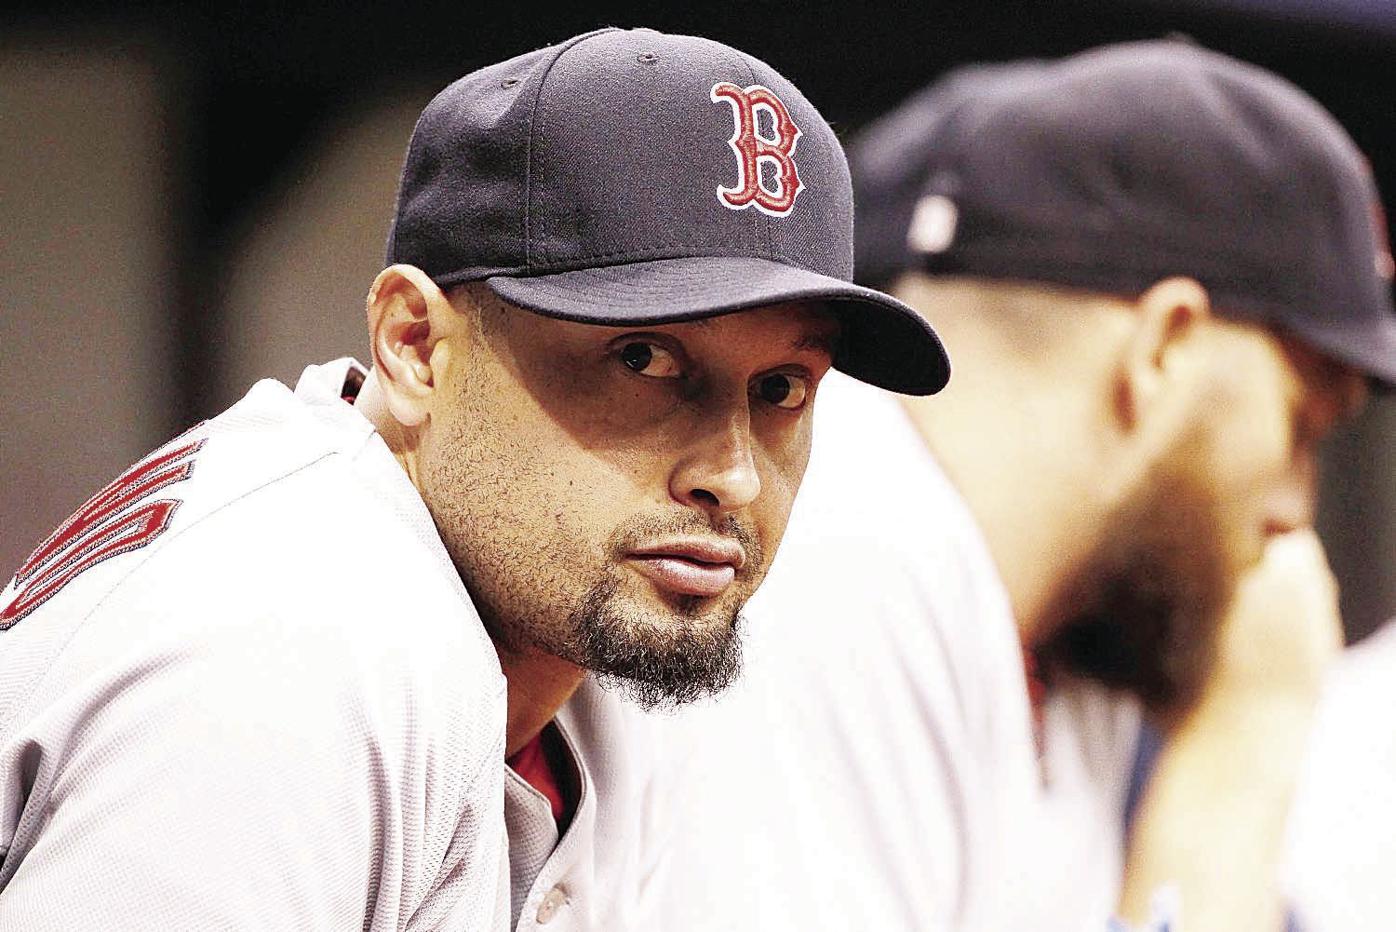 Alex Cora doesn't mind if Dustin Pedroia becomes the Red Sox manager 'in a  few years